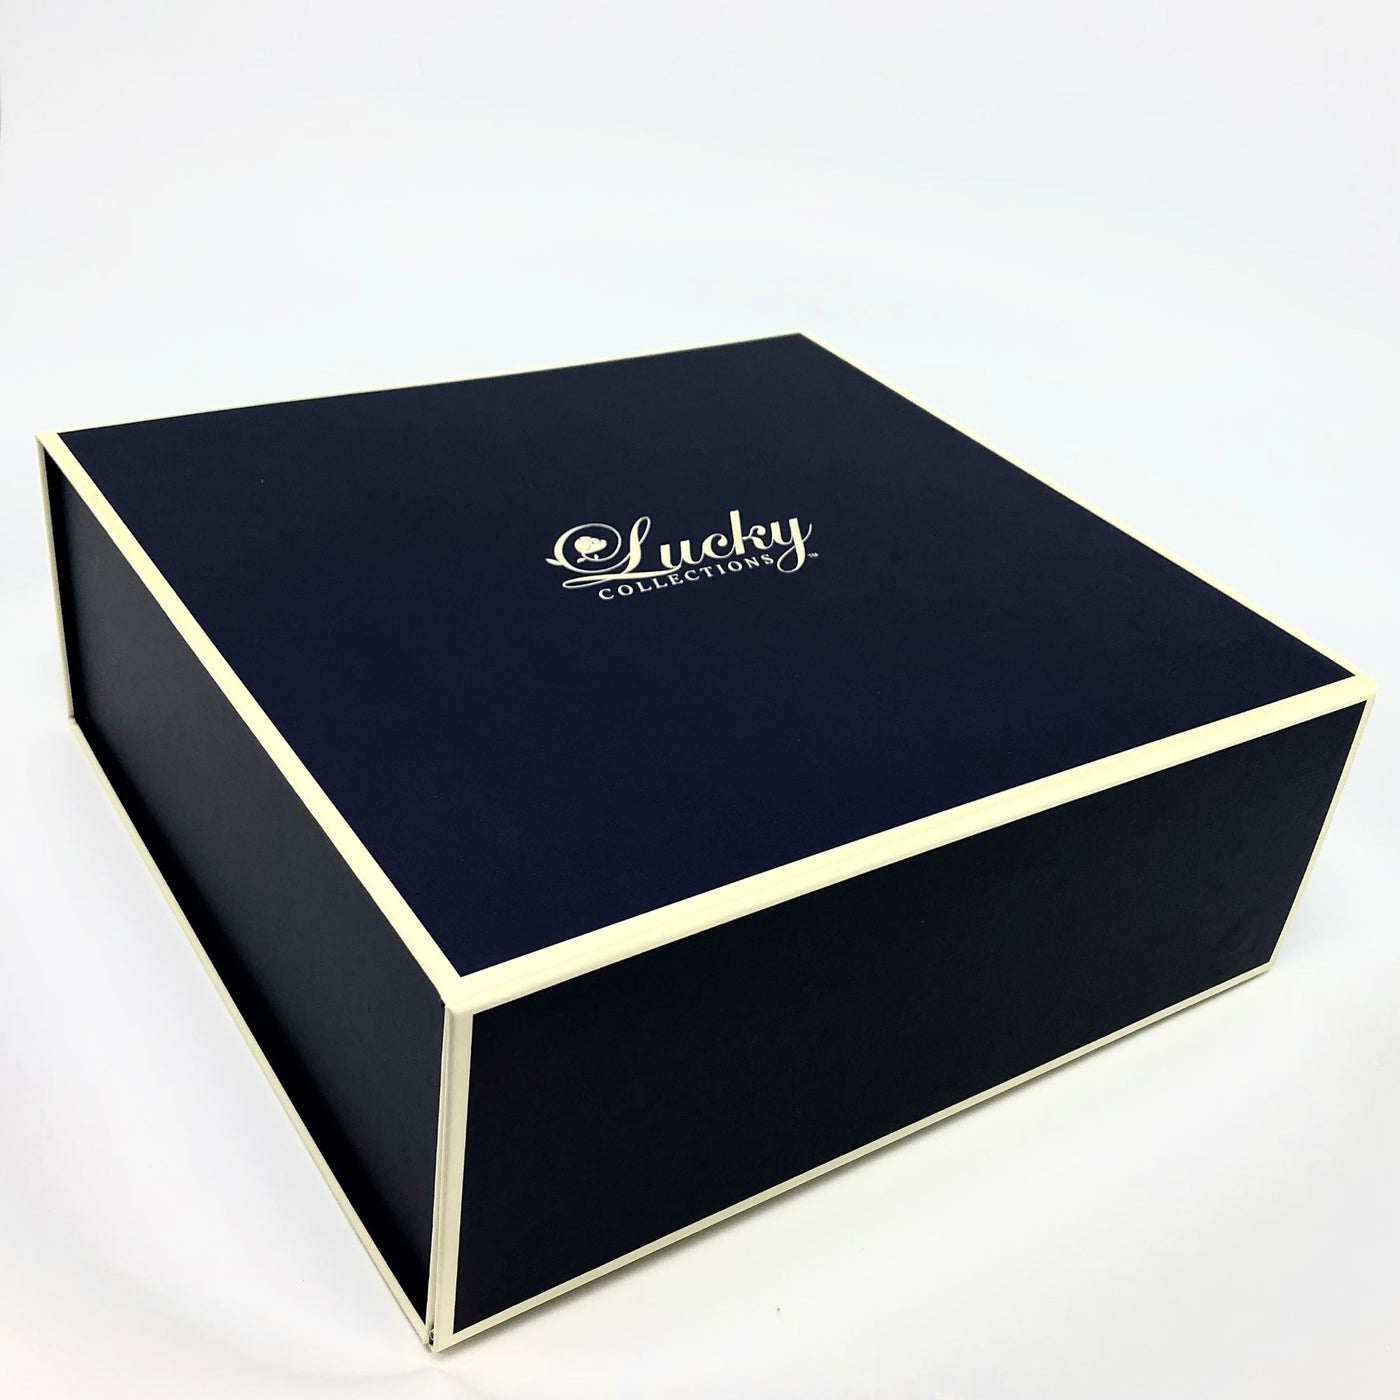 Lucky Collections ™ tiaras come in custom box